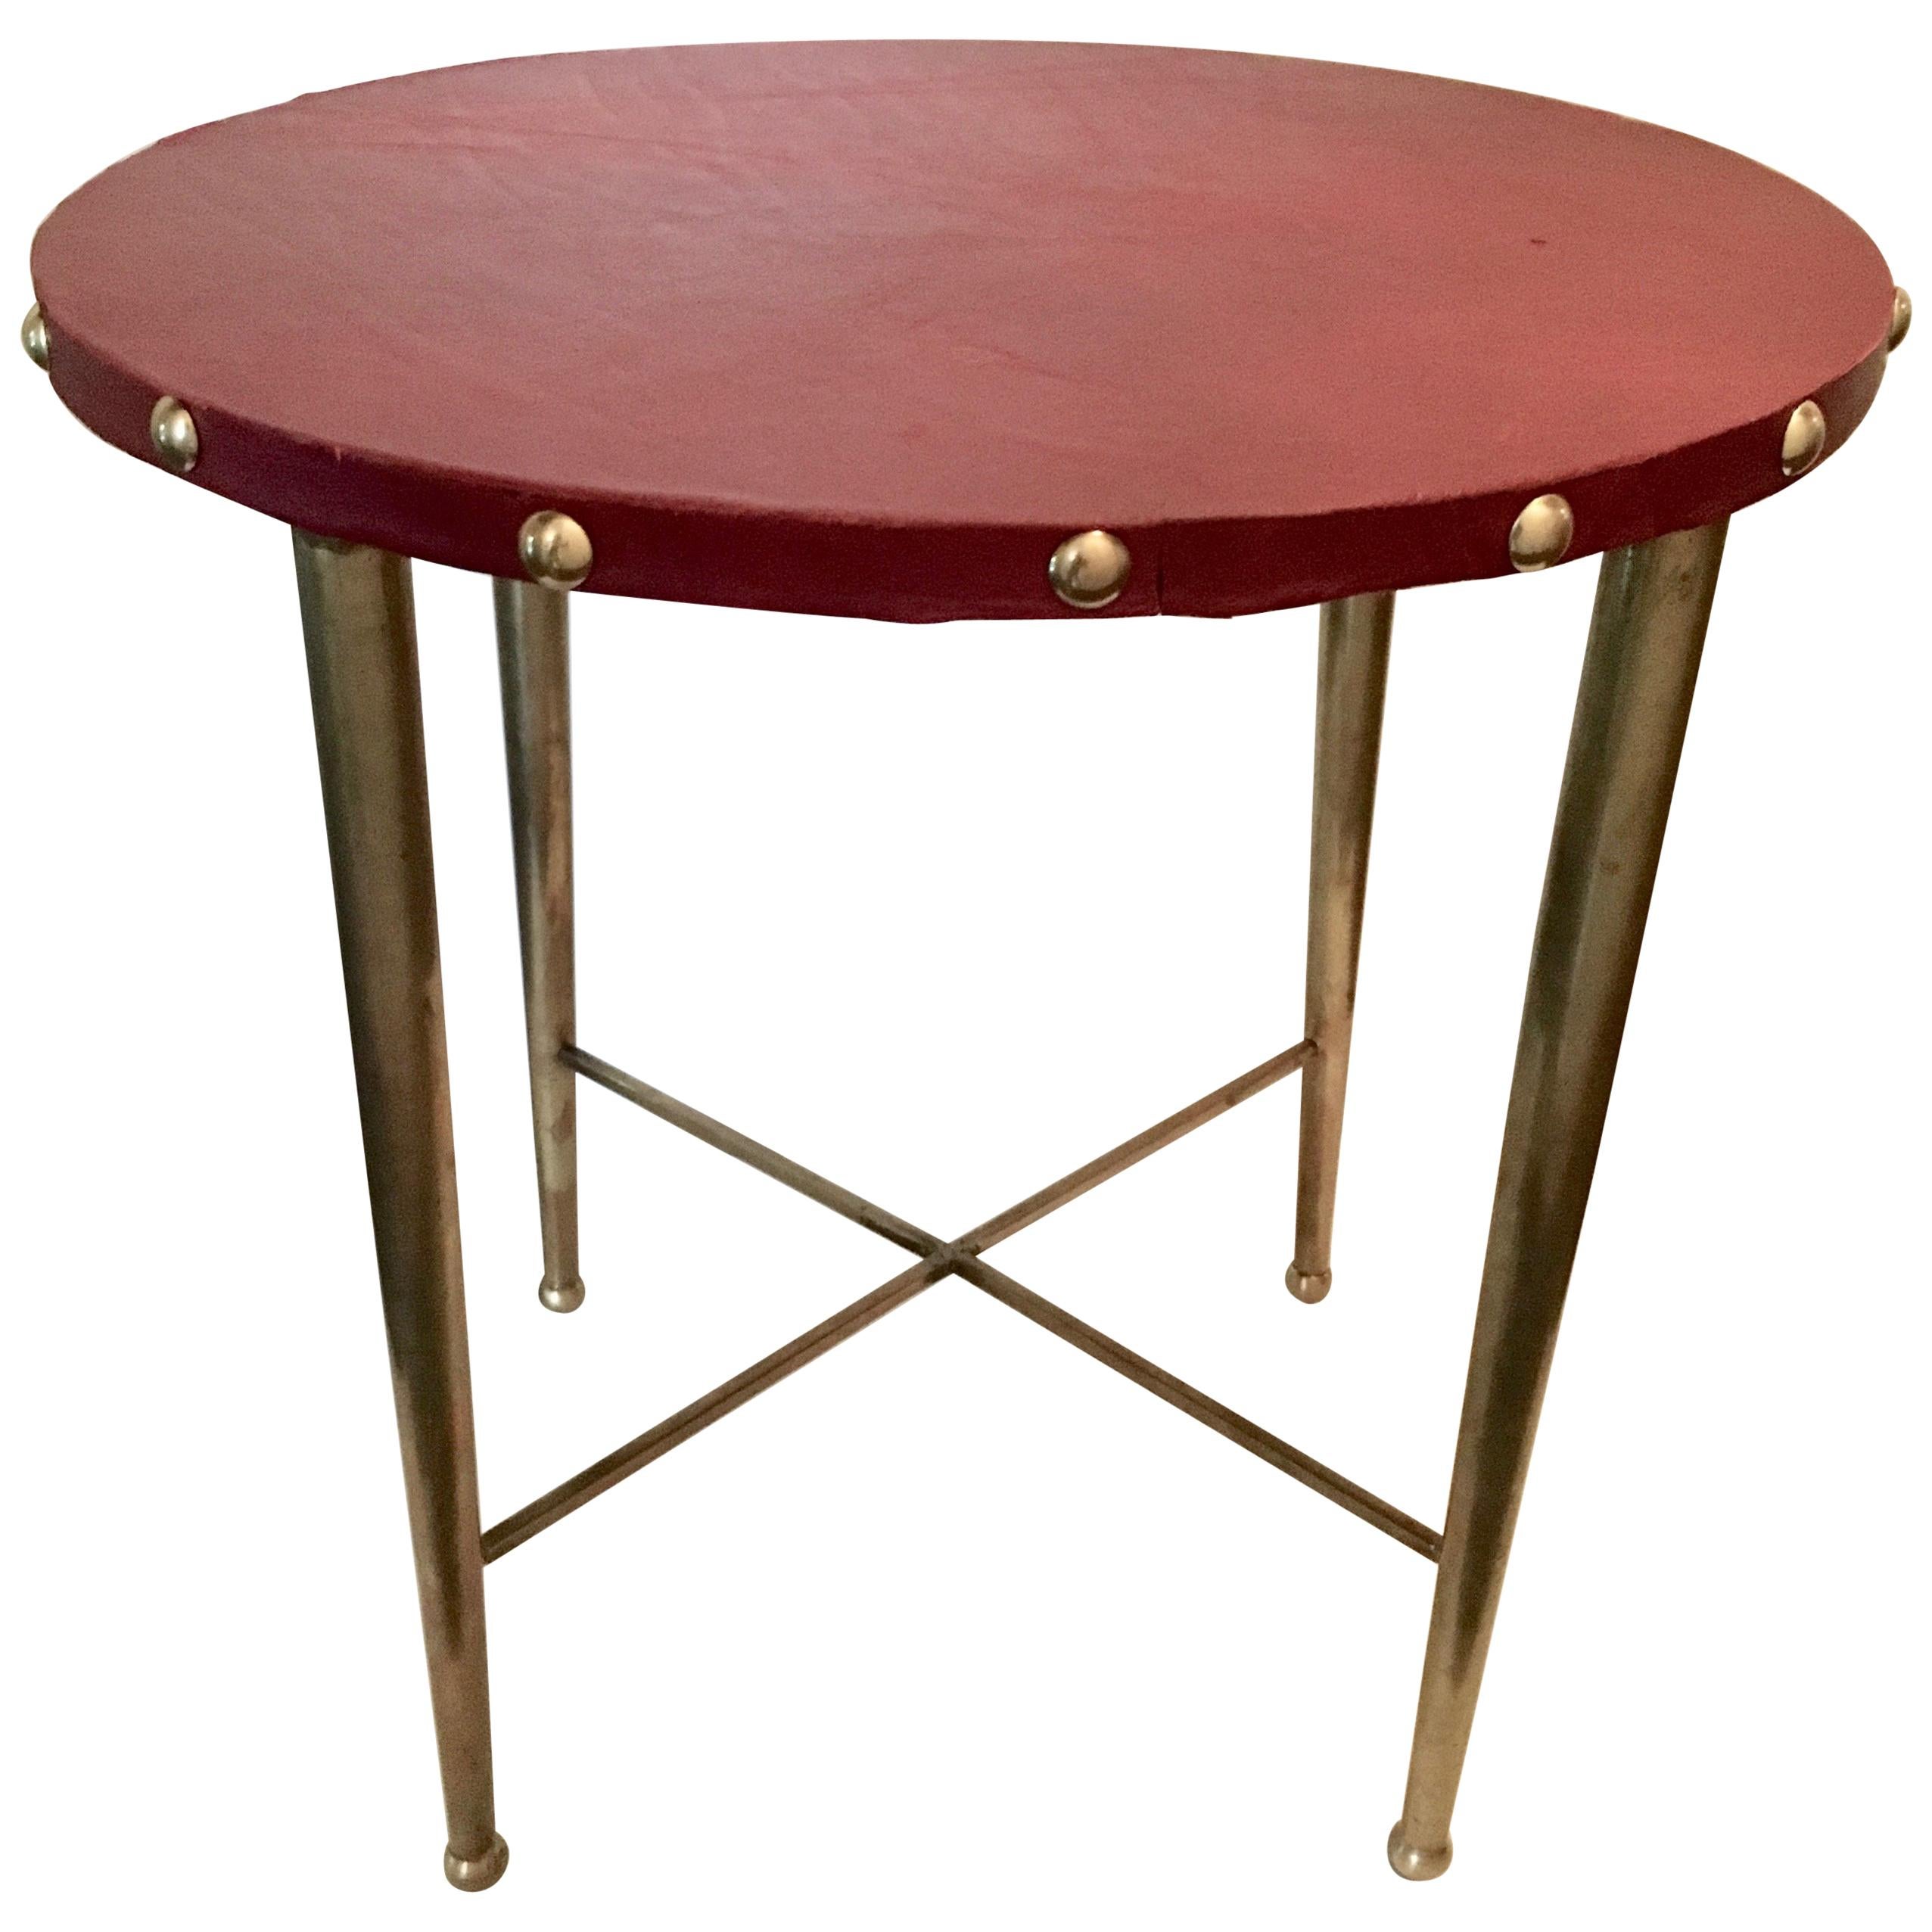 Italian Round Brass Table with Leather Top after Gio Ponti